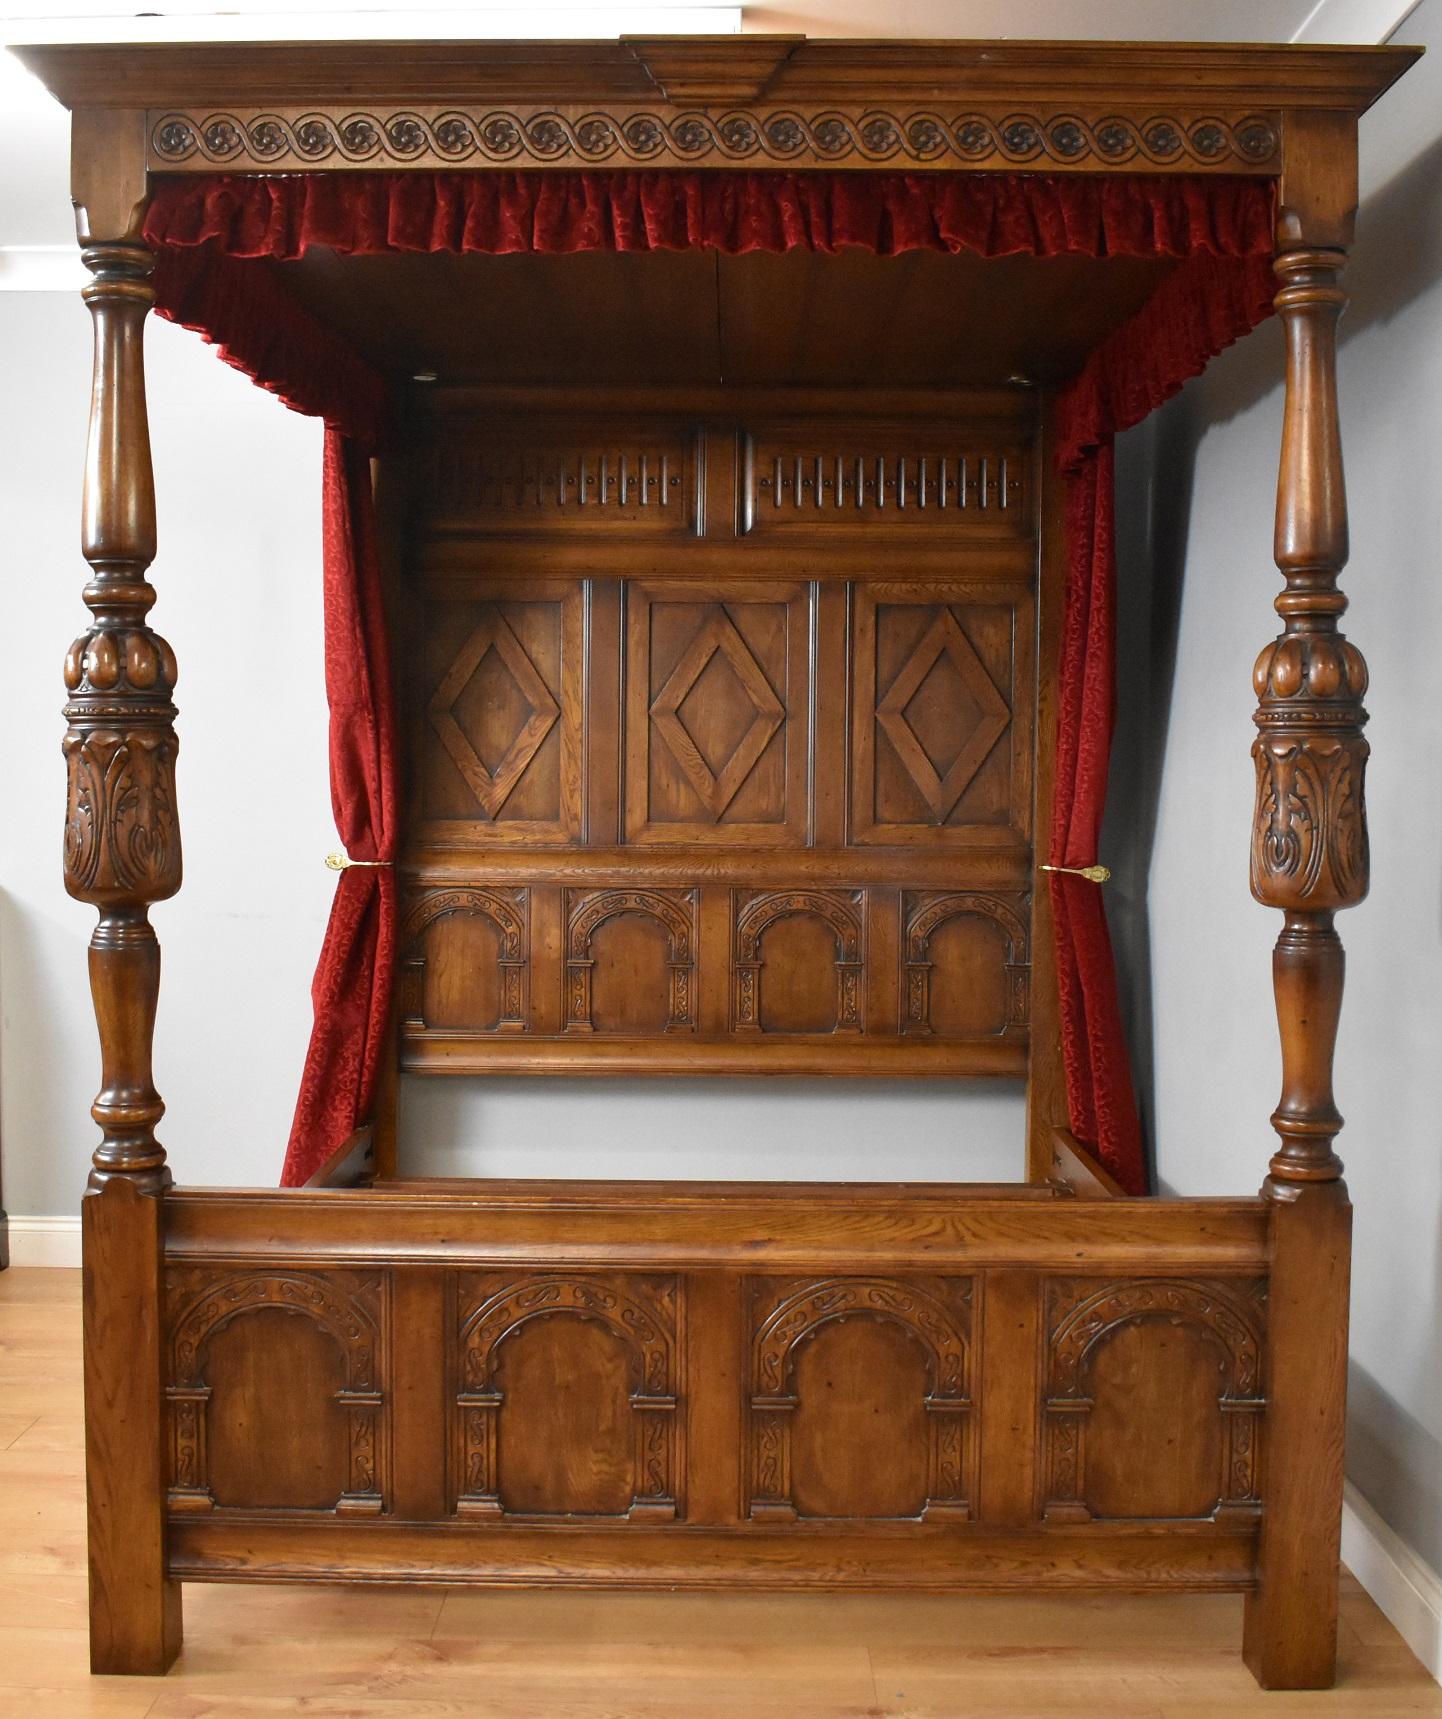 For sale is a good quality Jacobean style oak four poster bed, having a carved top, supported by two turned and carved supports, united by the foot board featuring arched panels. Overall, the bed is in good condition showing minor signs of wear